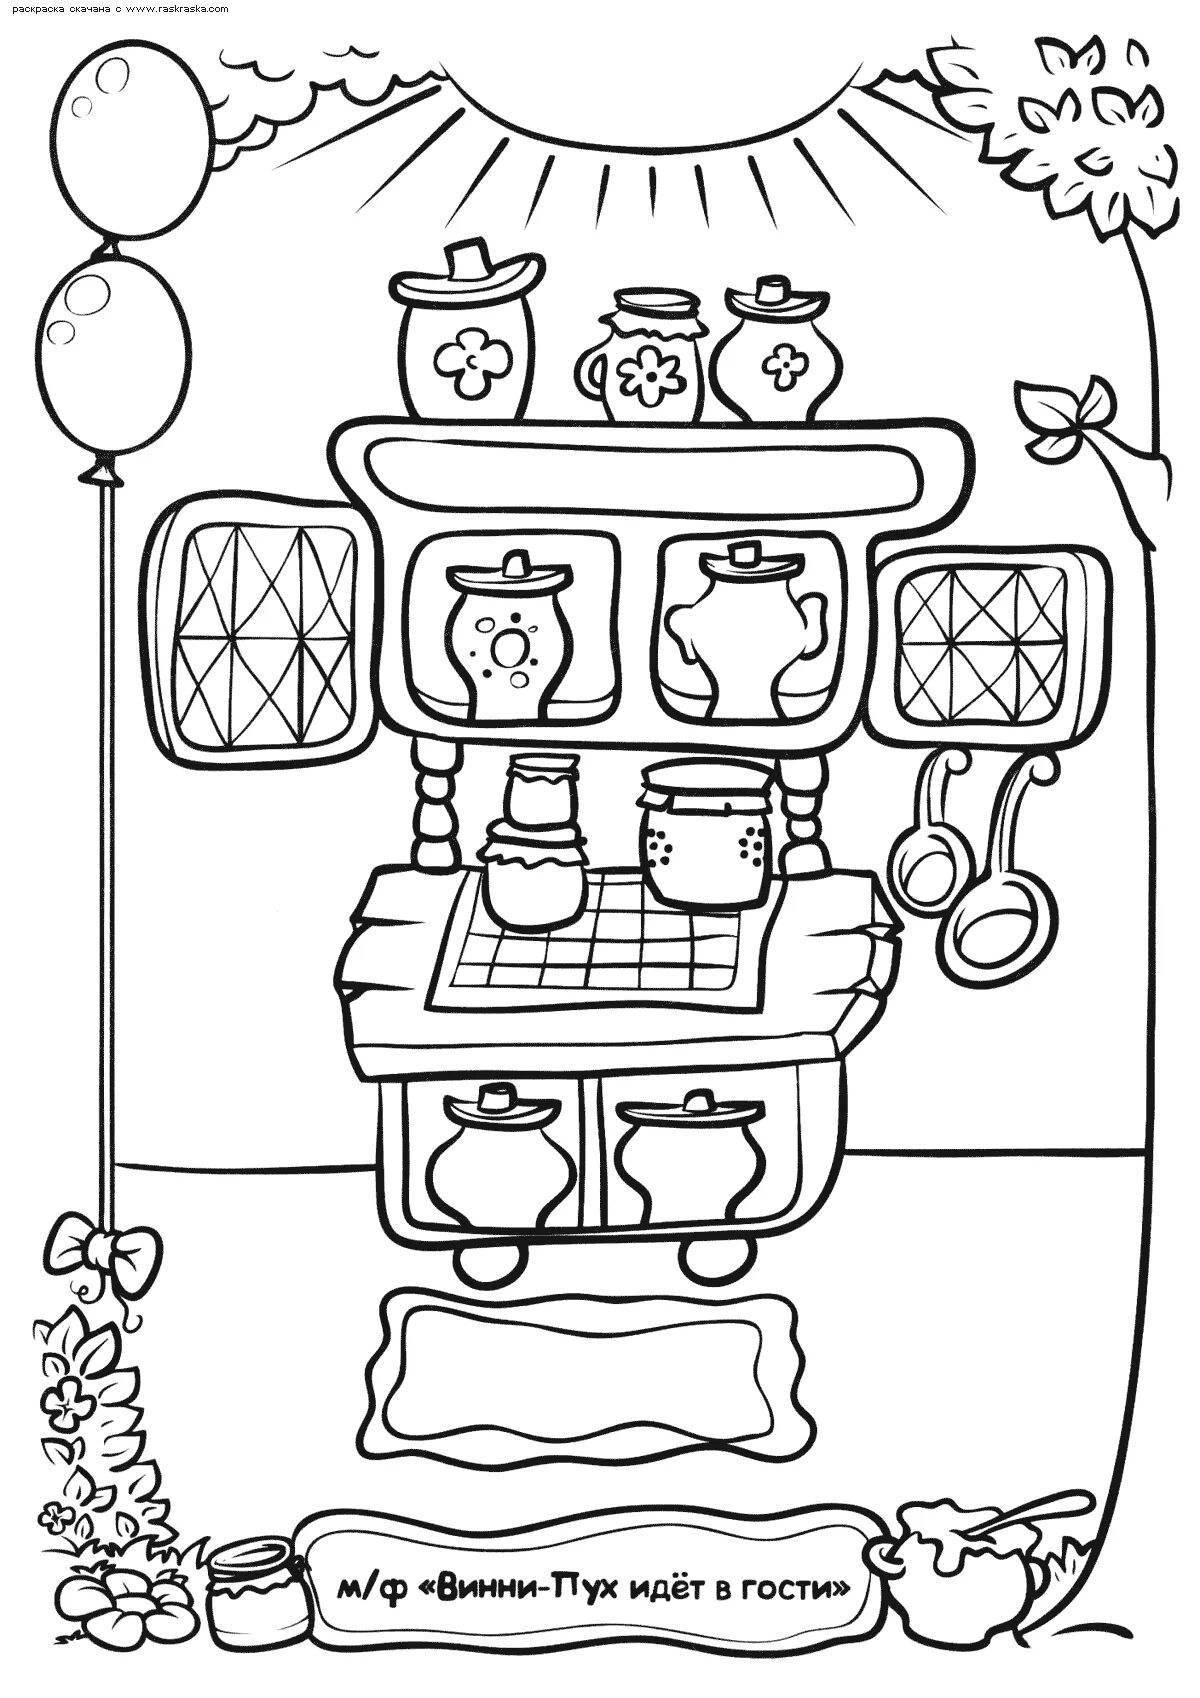 Adorable buffet coloring page